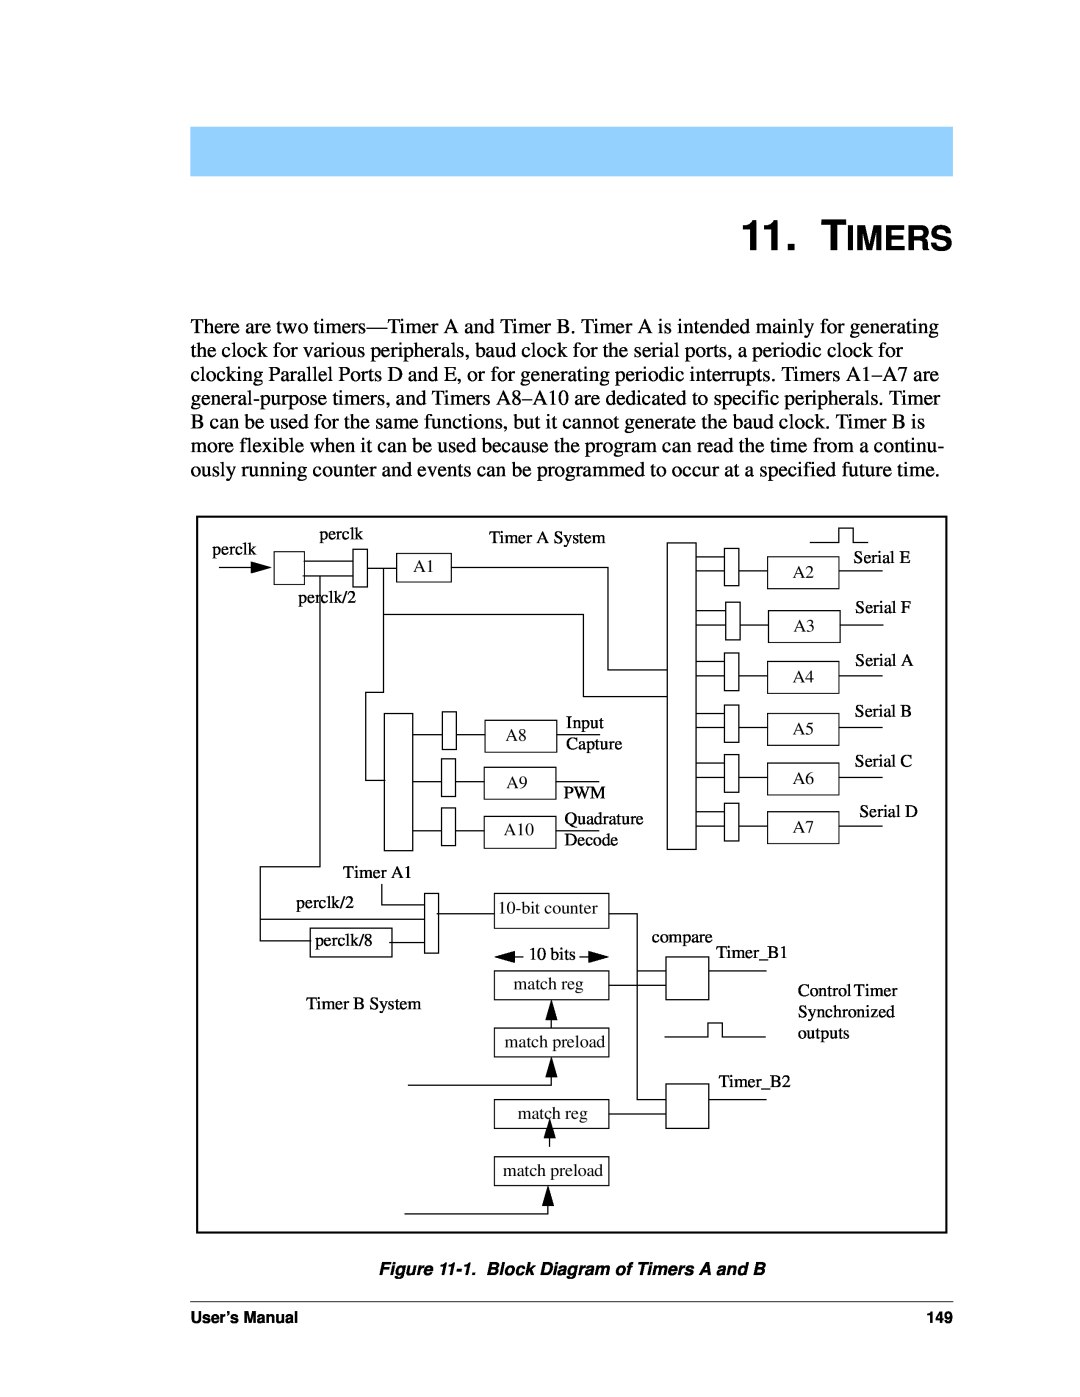 Jameco Electronics 3000, 2000 manual 1.Block Diagram of Timers A and B 